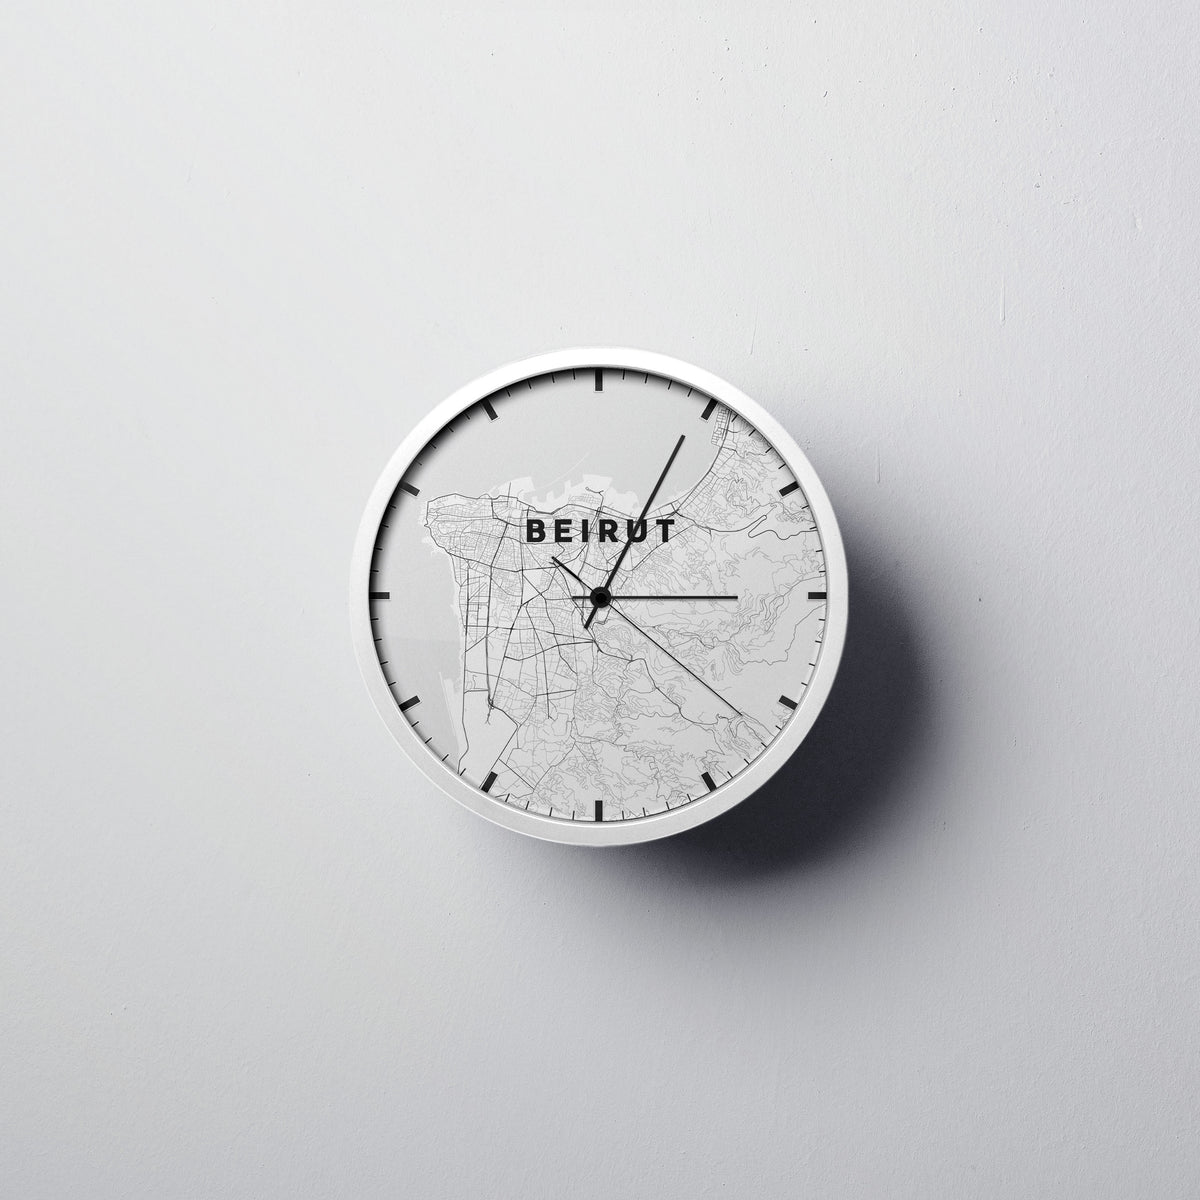 Beirut Wall Clock - Point Two Design